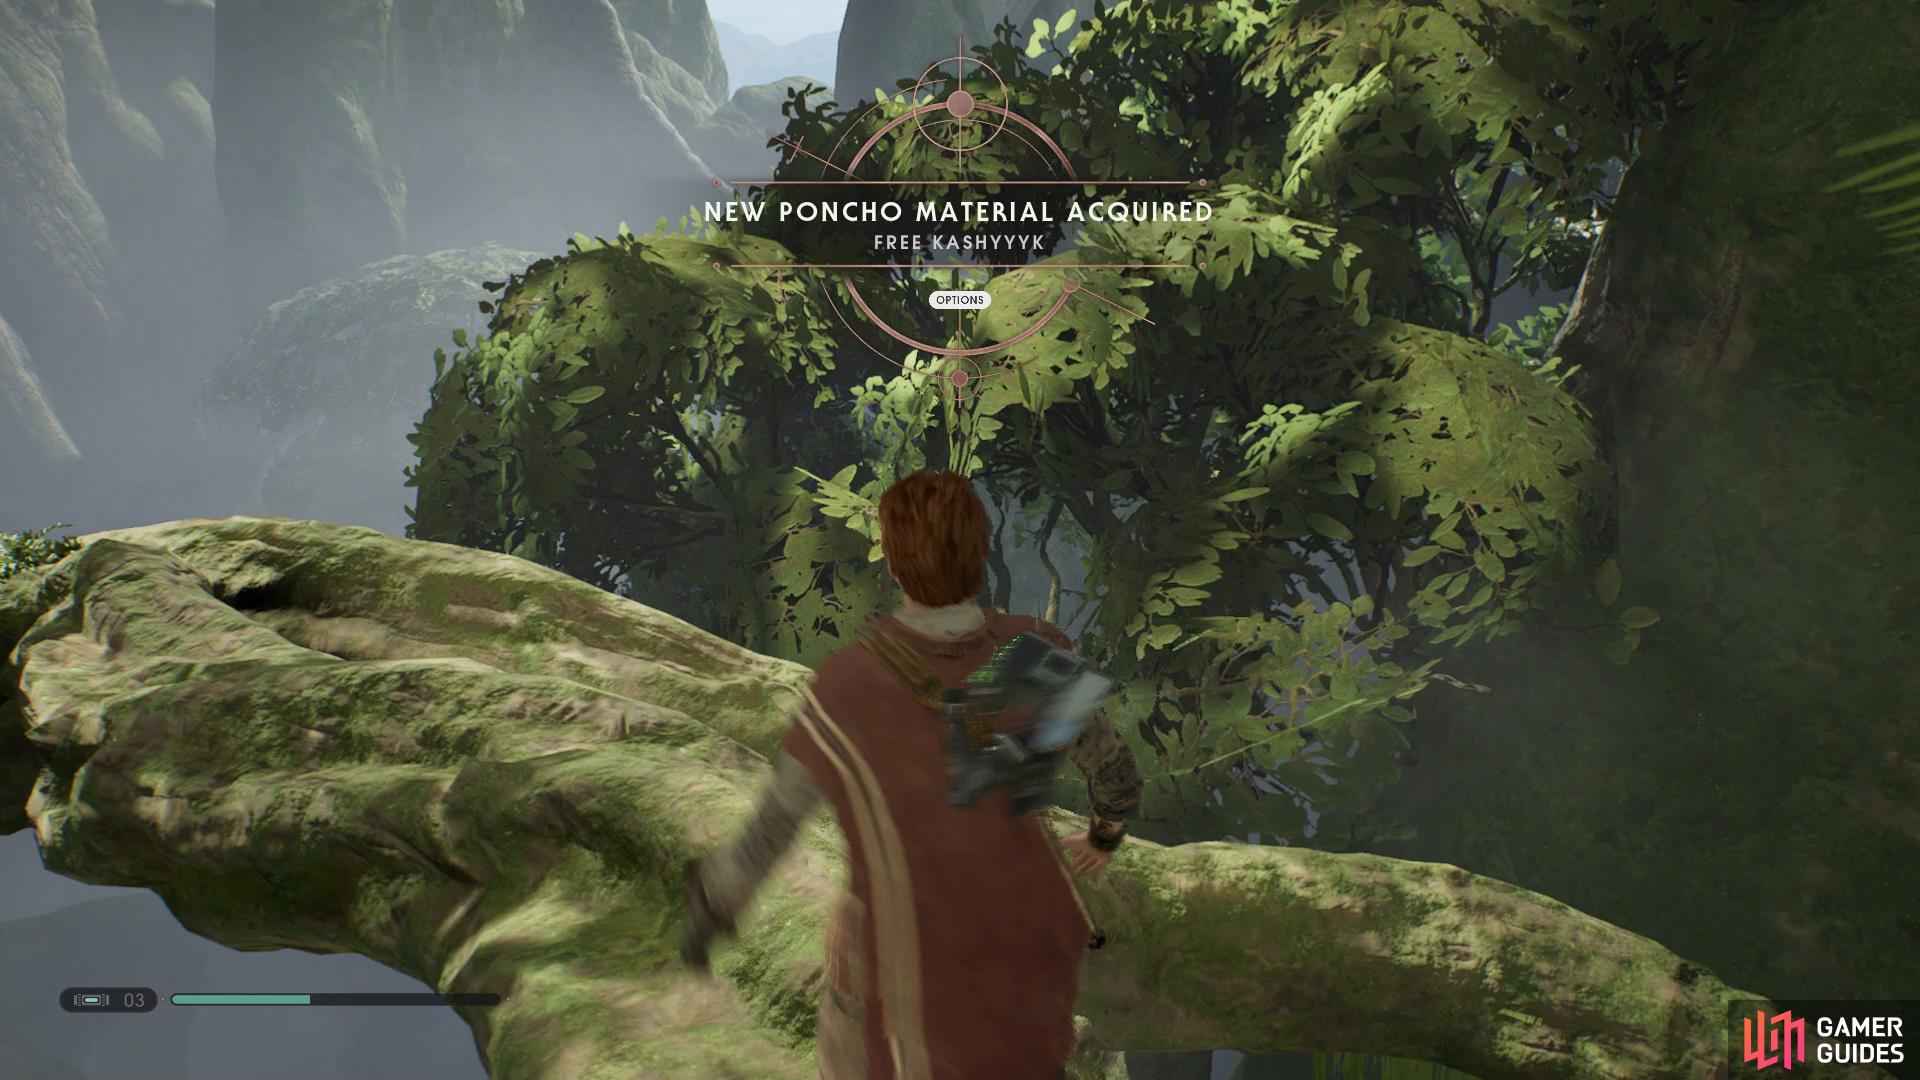 Get the Free Kashyyyk Poncho from the Chest on the branch